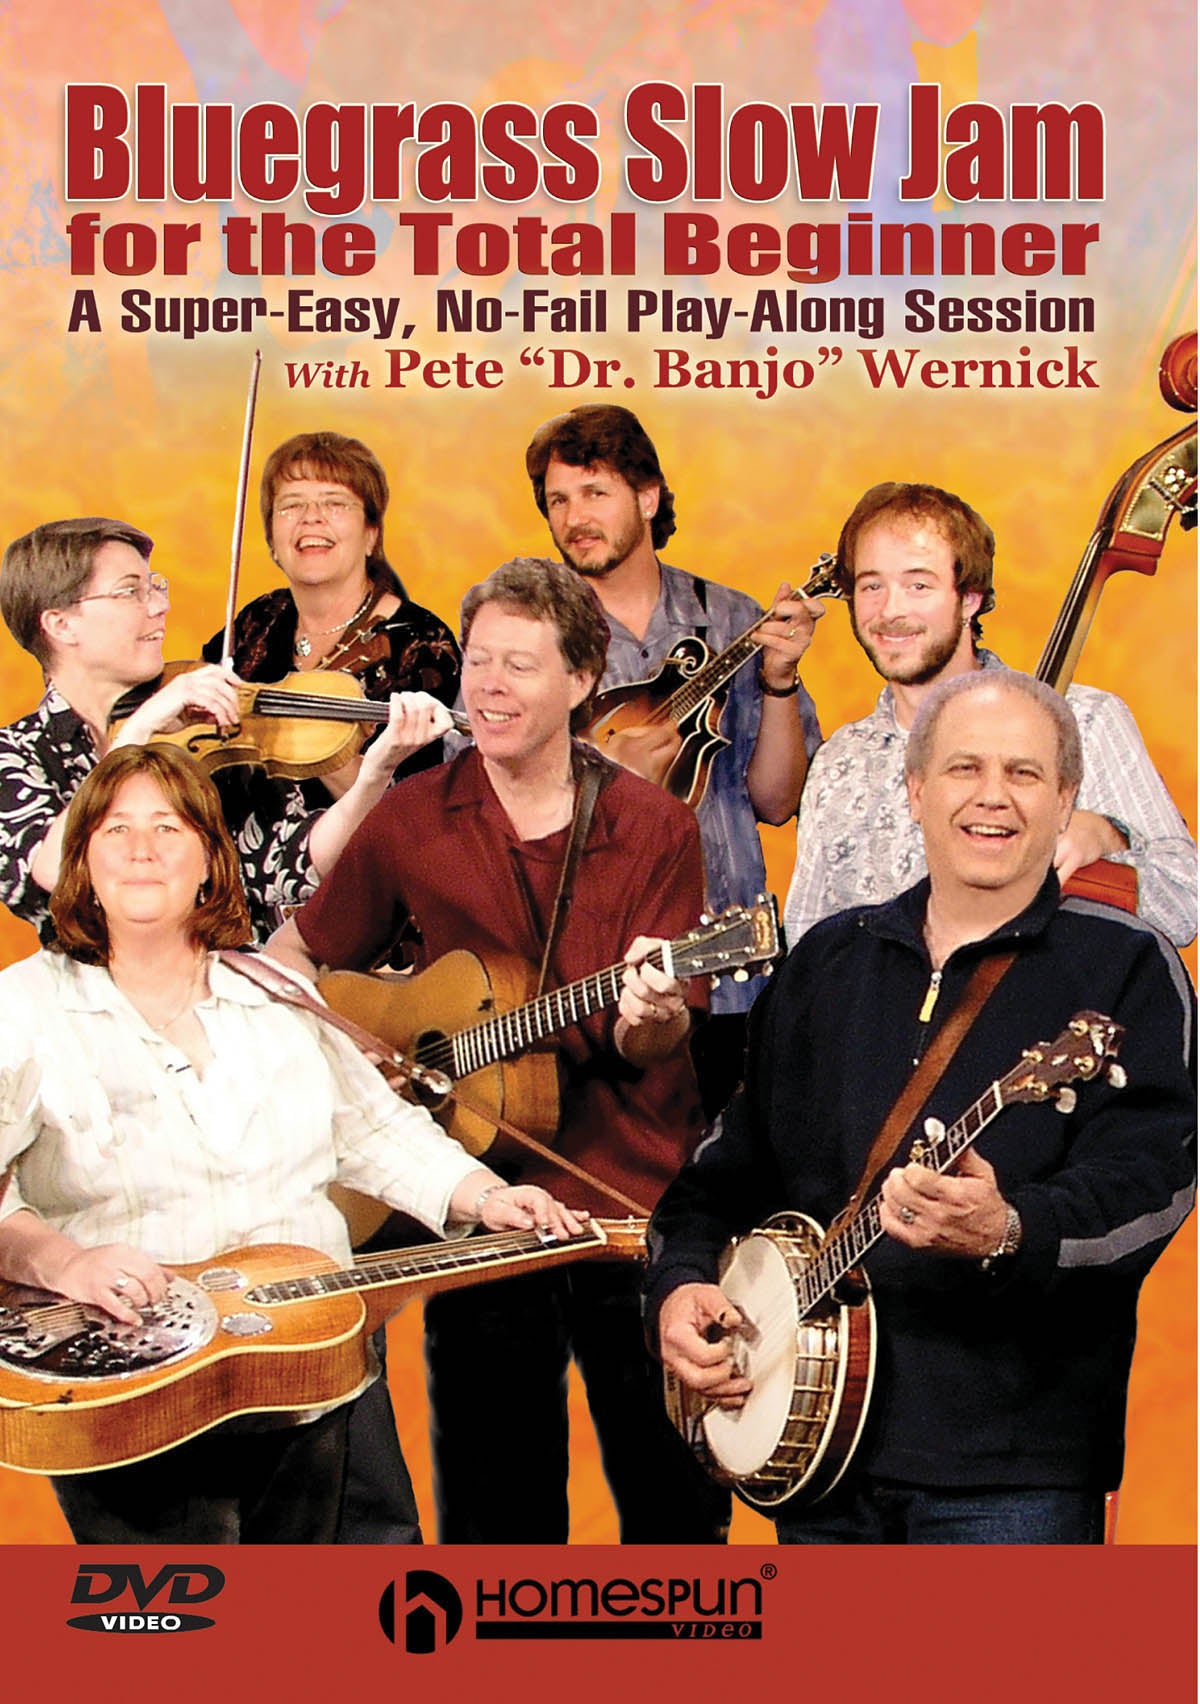 Image 1 of DVD - Bluegrass Slow Jam for the Total Beginner-A Super-Easy, No-Fail Play-Along Session - SKU# 300-DVD233 : Product Type Media : Elderly Instruments